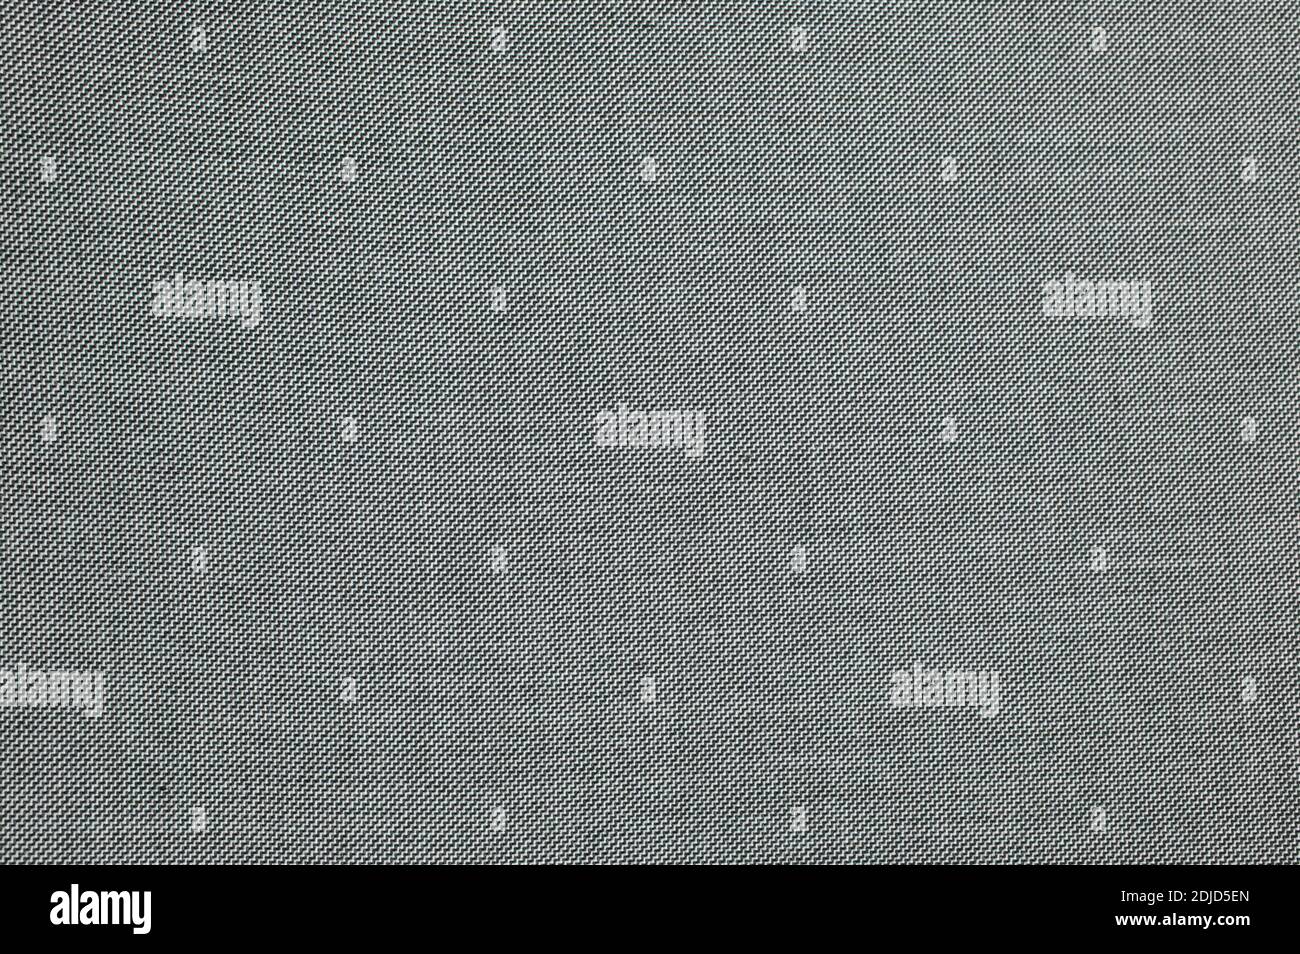 Grey sharkskin texture wool textile suit fabric material background ...